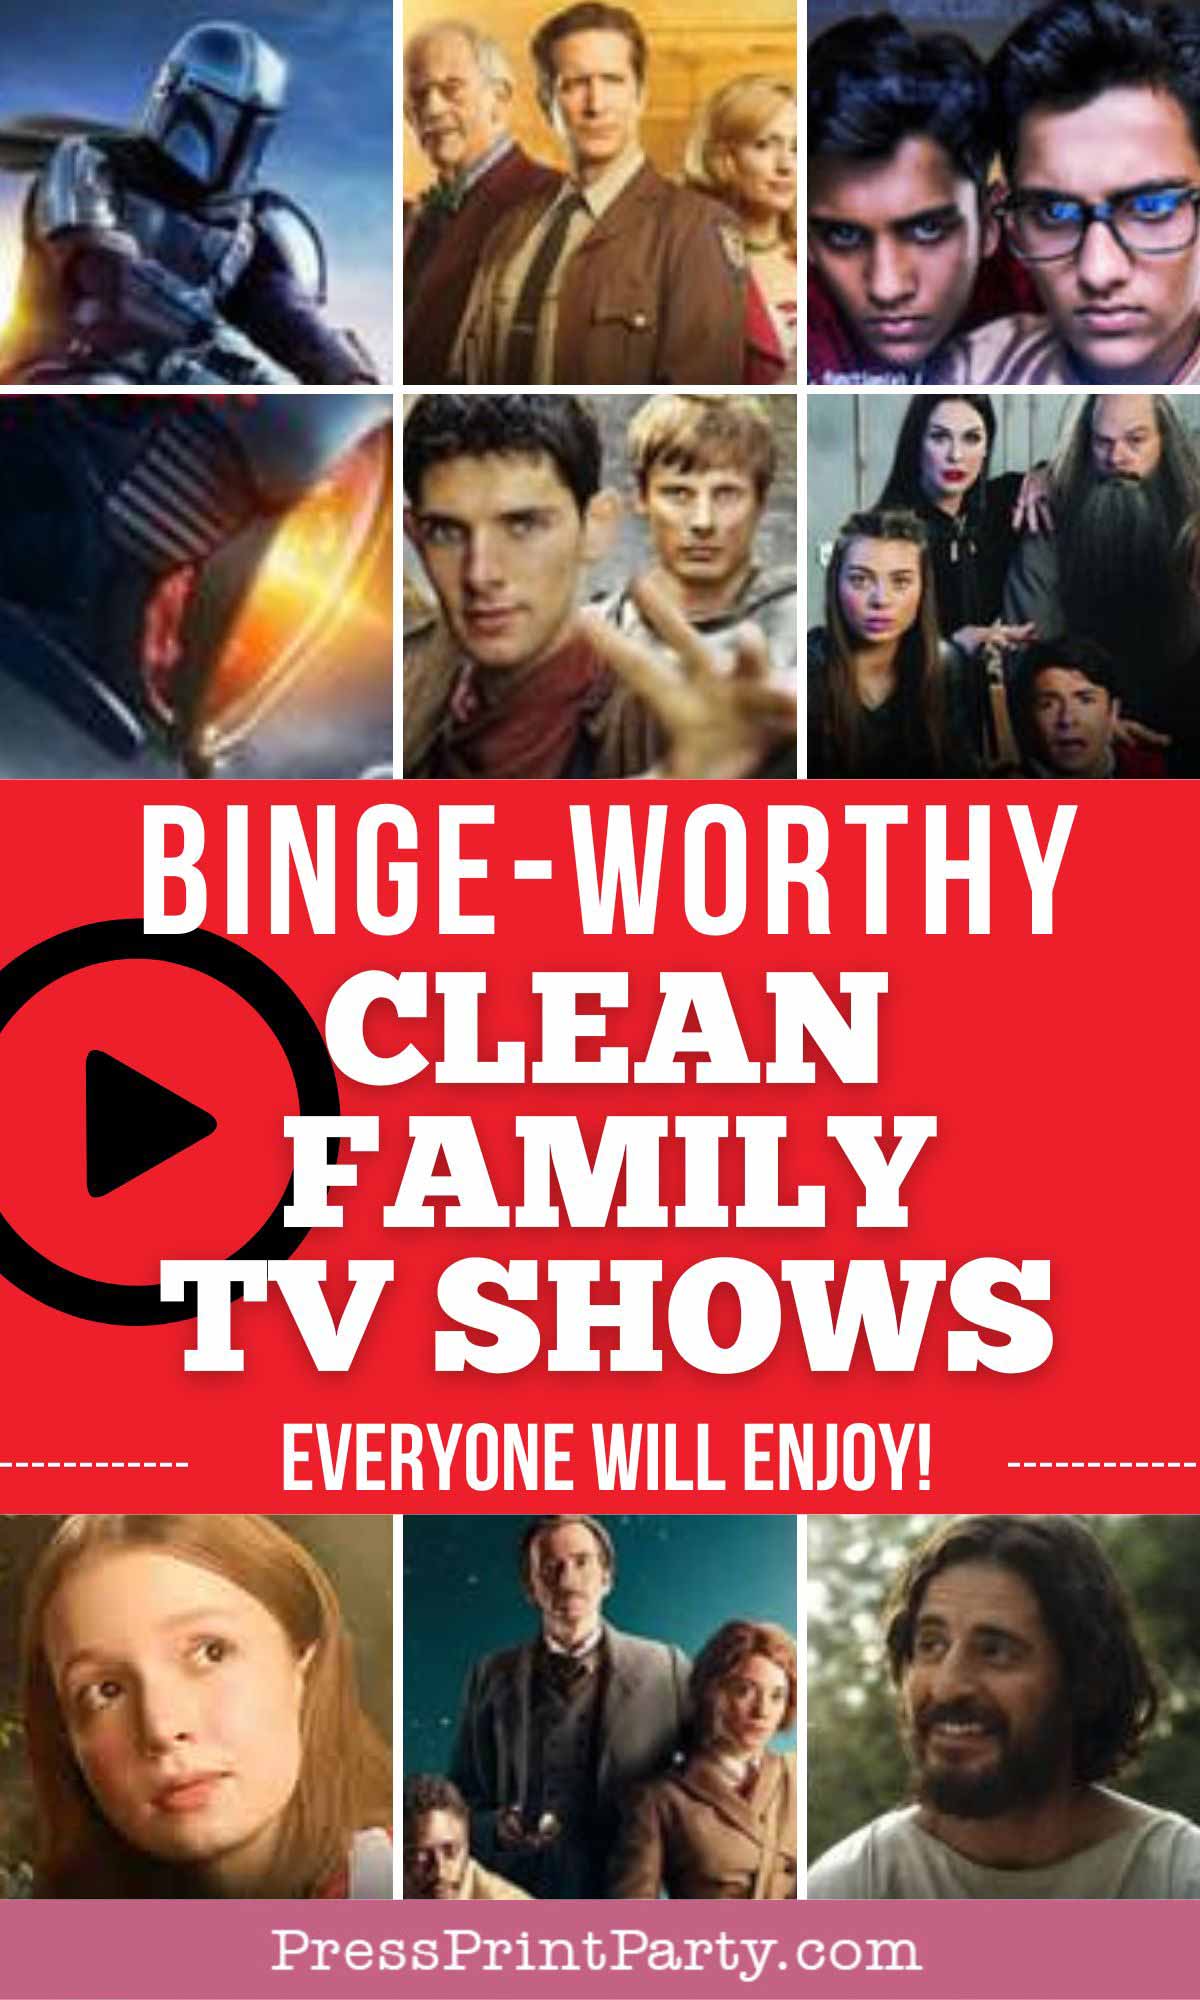 binge worthy clean family tv shows that everyone will enjoy list. family friendly - Press Print Party